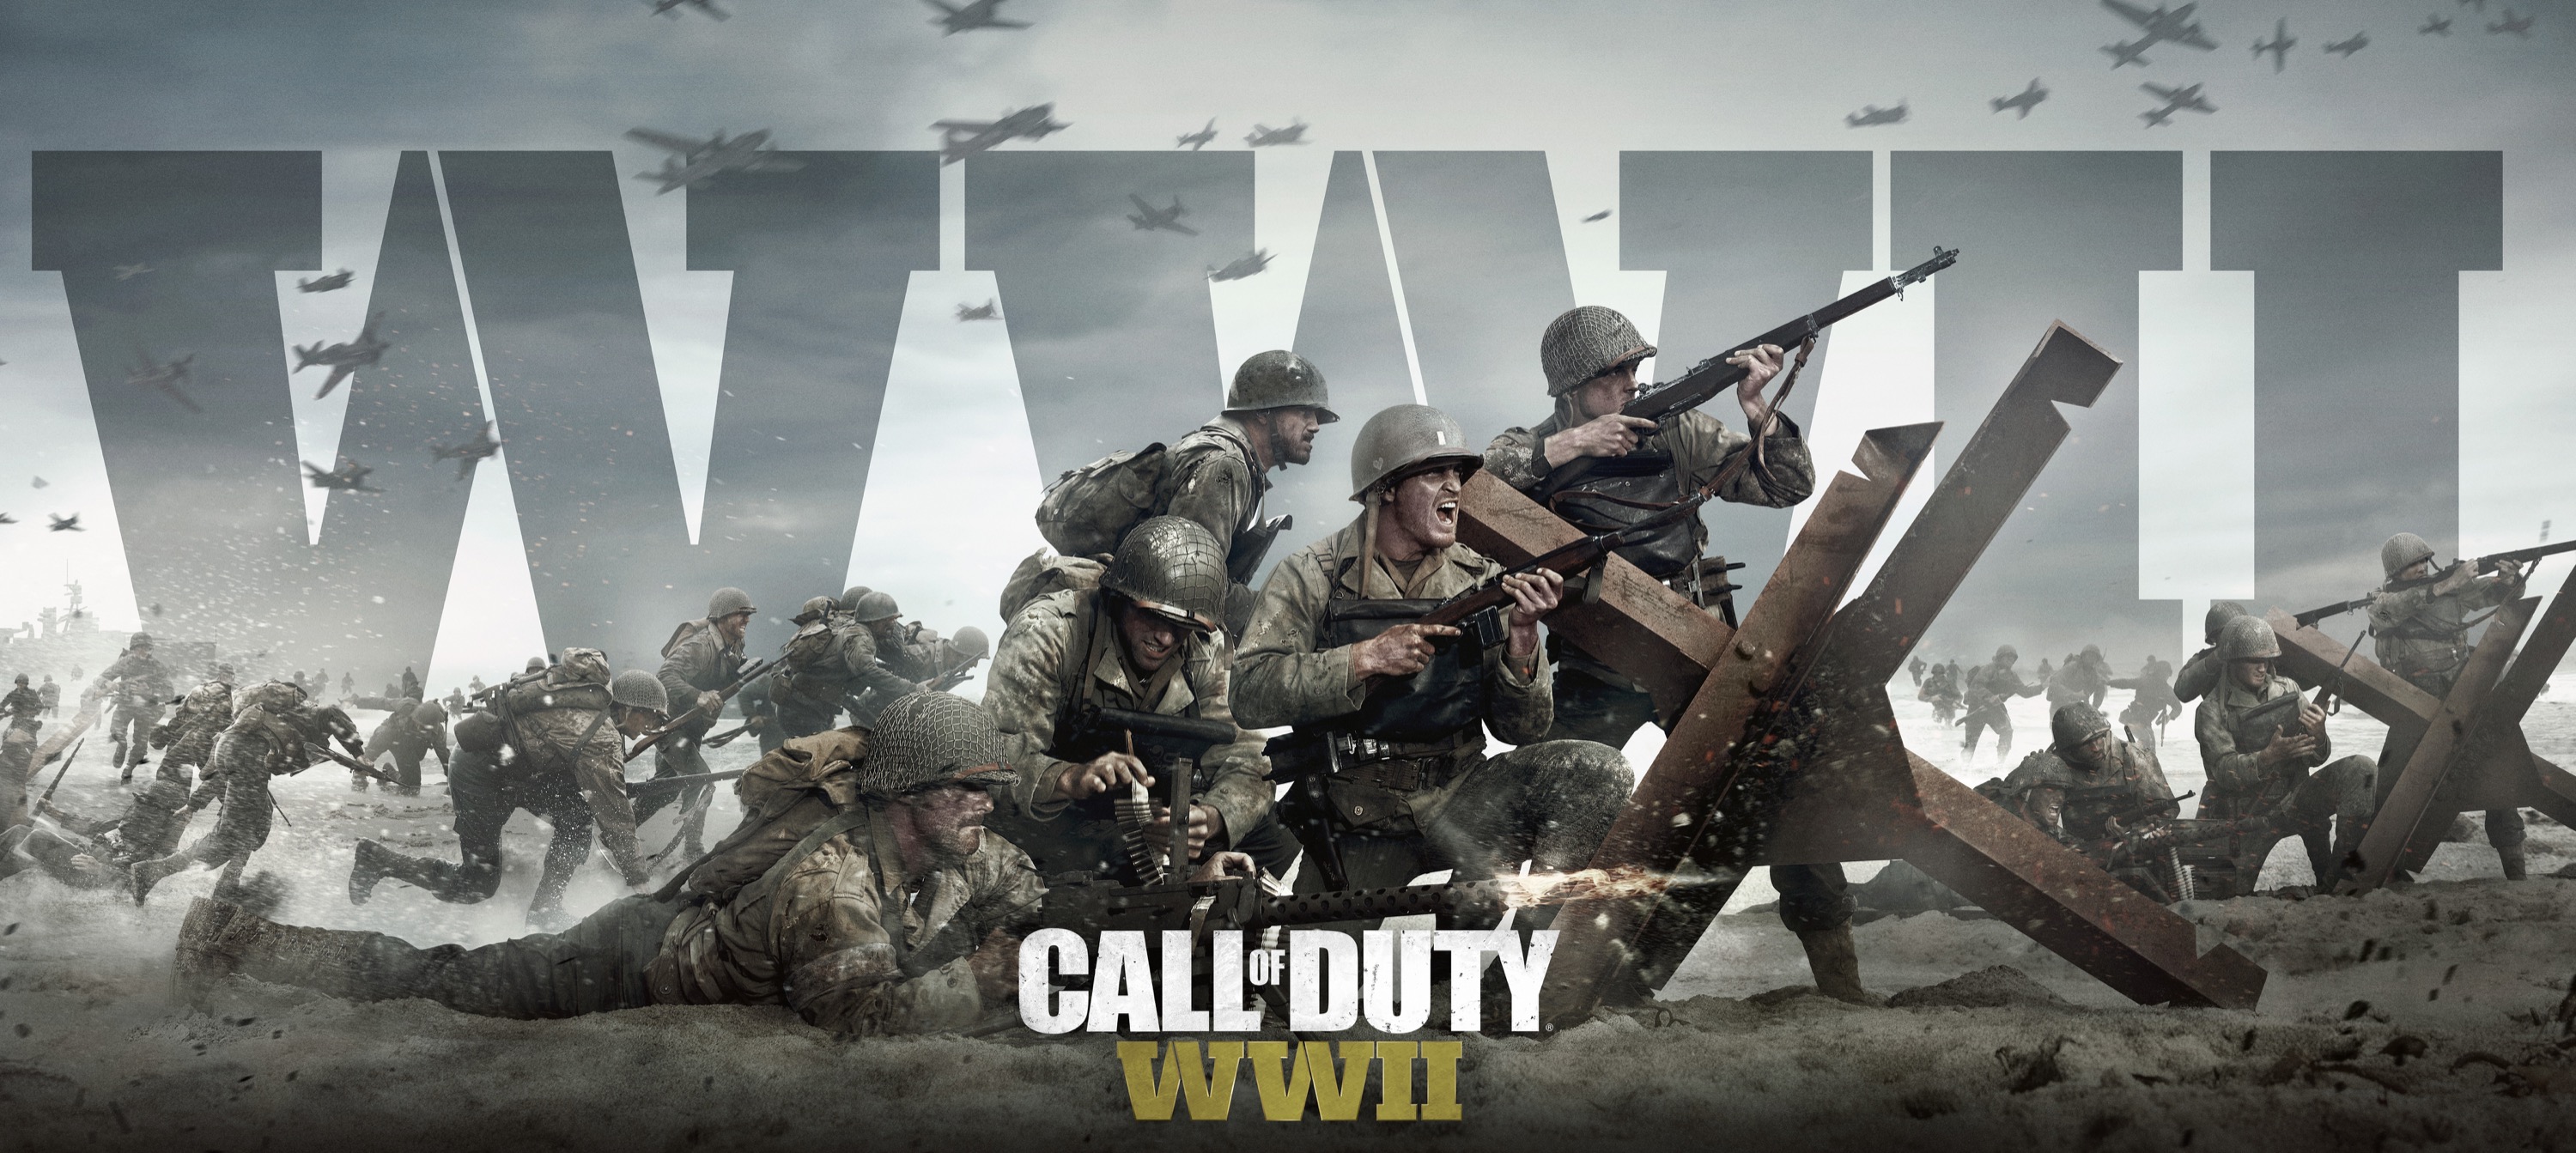 Call Of Duty Video Games Video Game Art Call Of Duty WWii 3000x1343